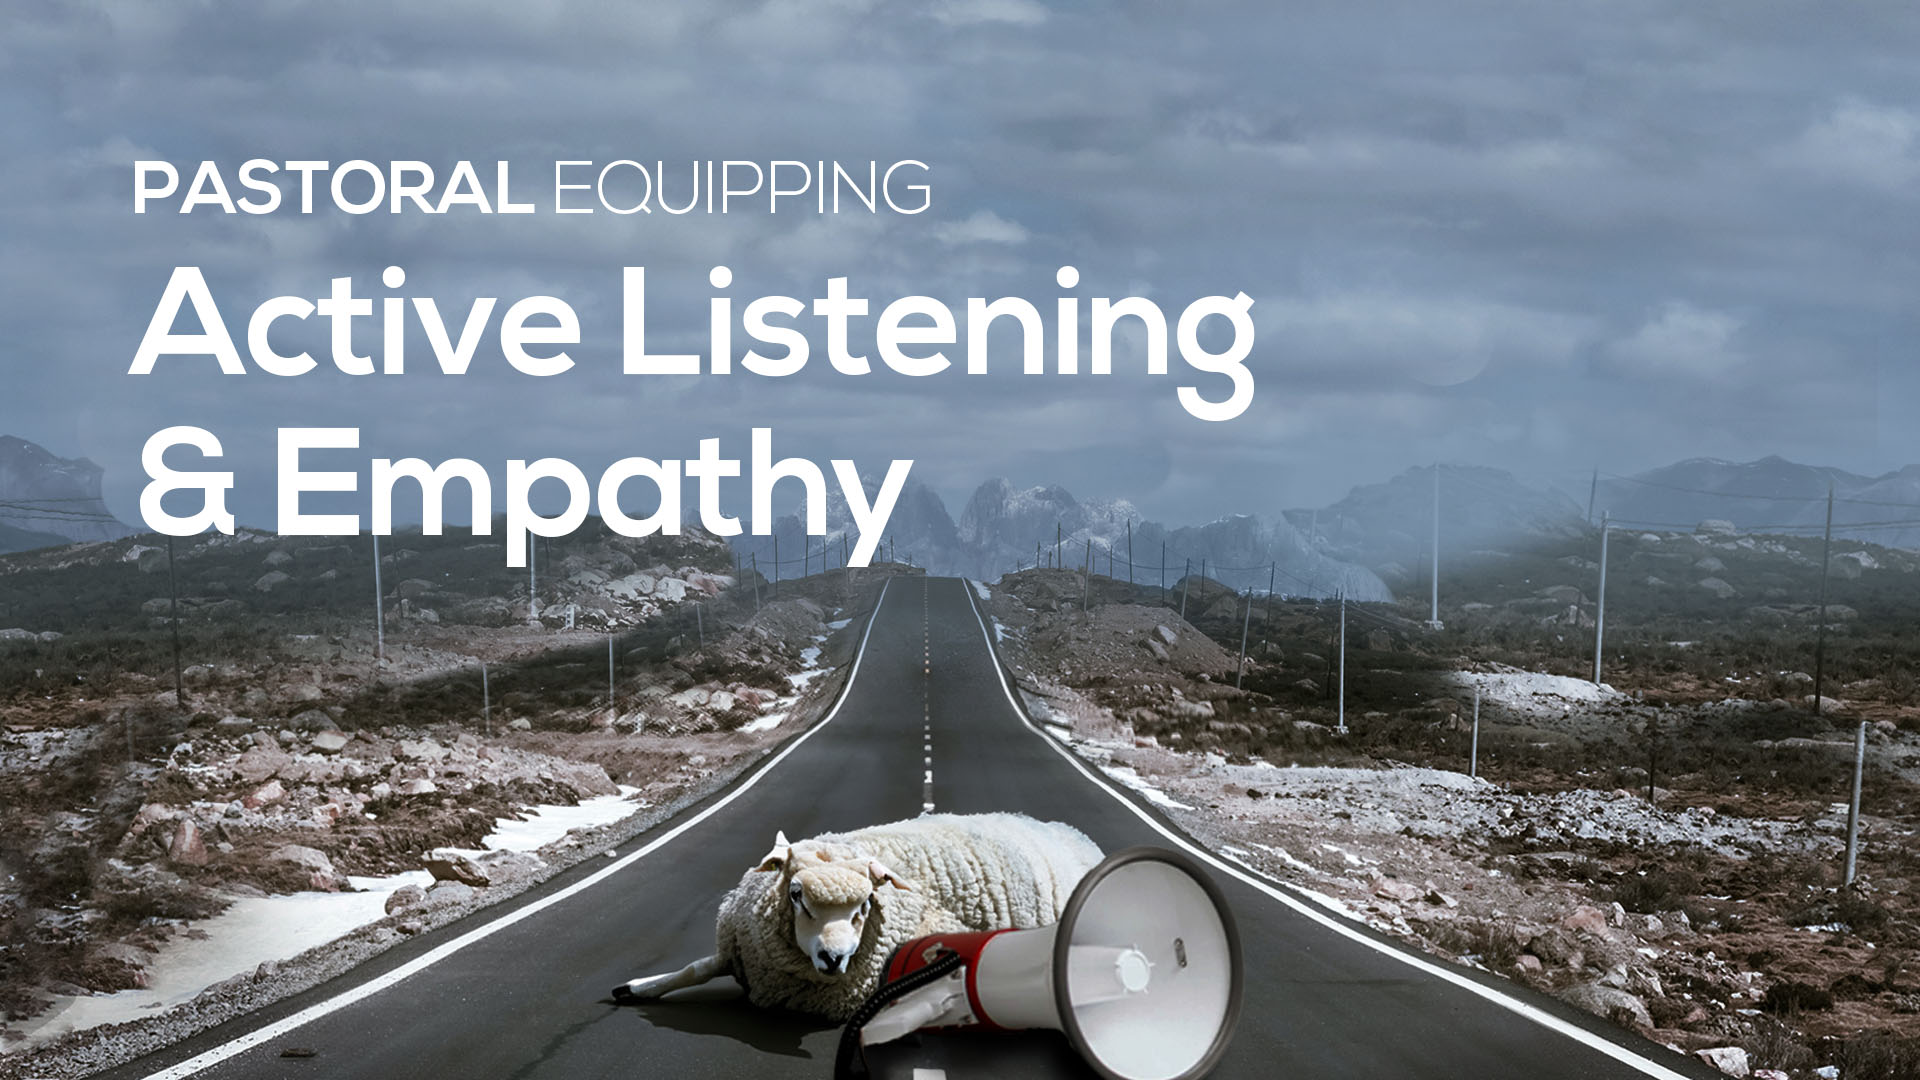 Video image for ‘Active Listening & Empathy’ about helping pastors to learn how to listen well